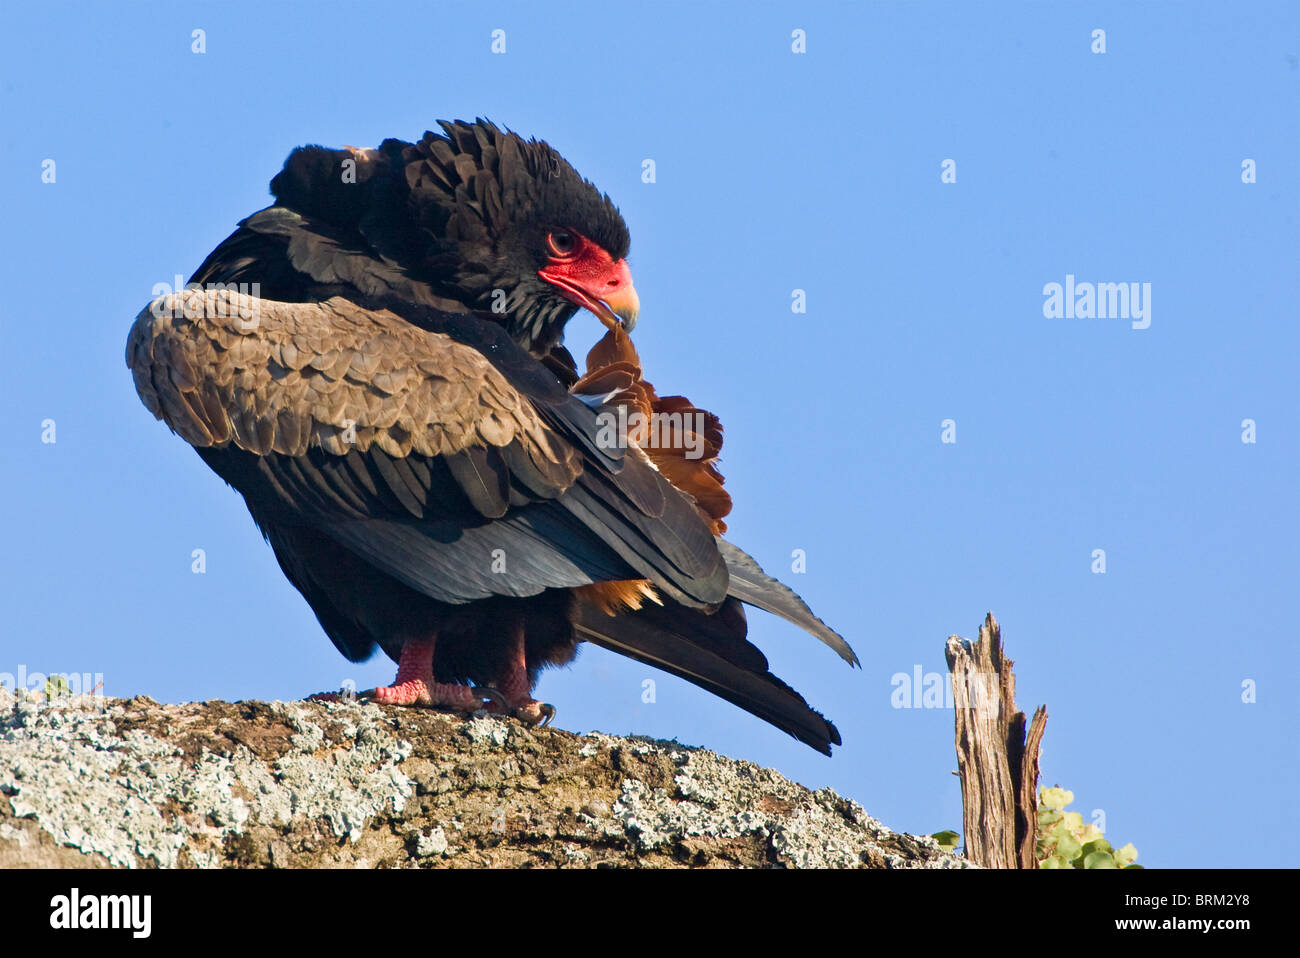 Bateleur preening while perched Stock Photo